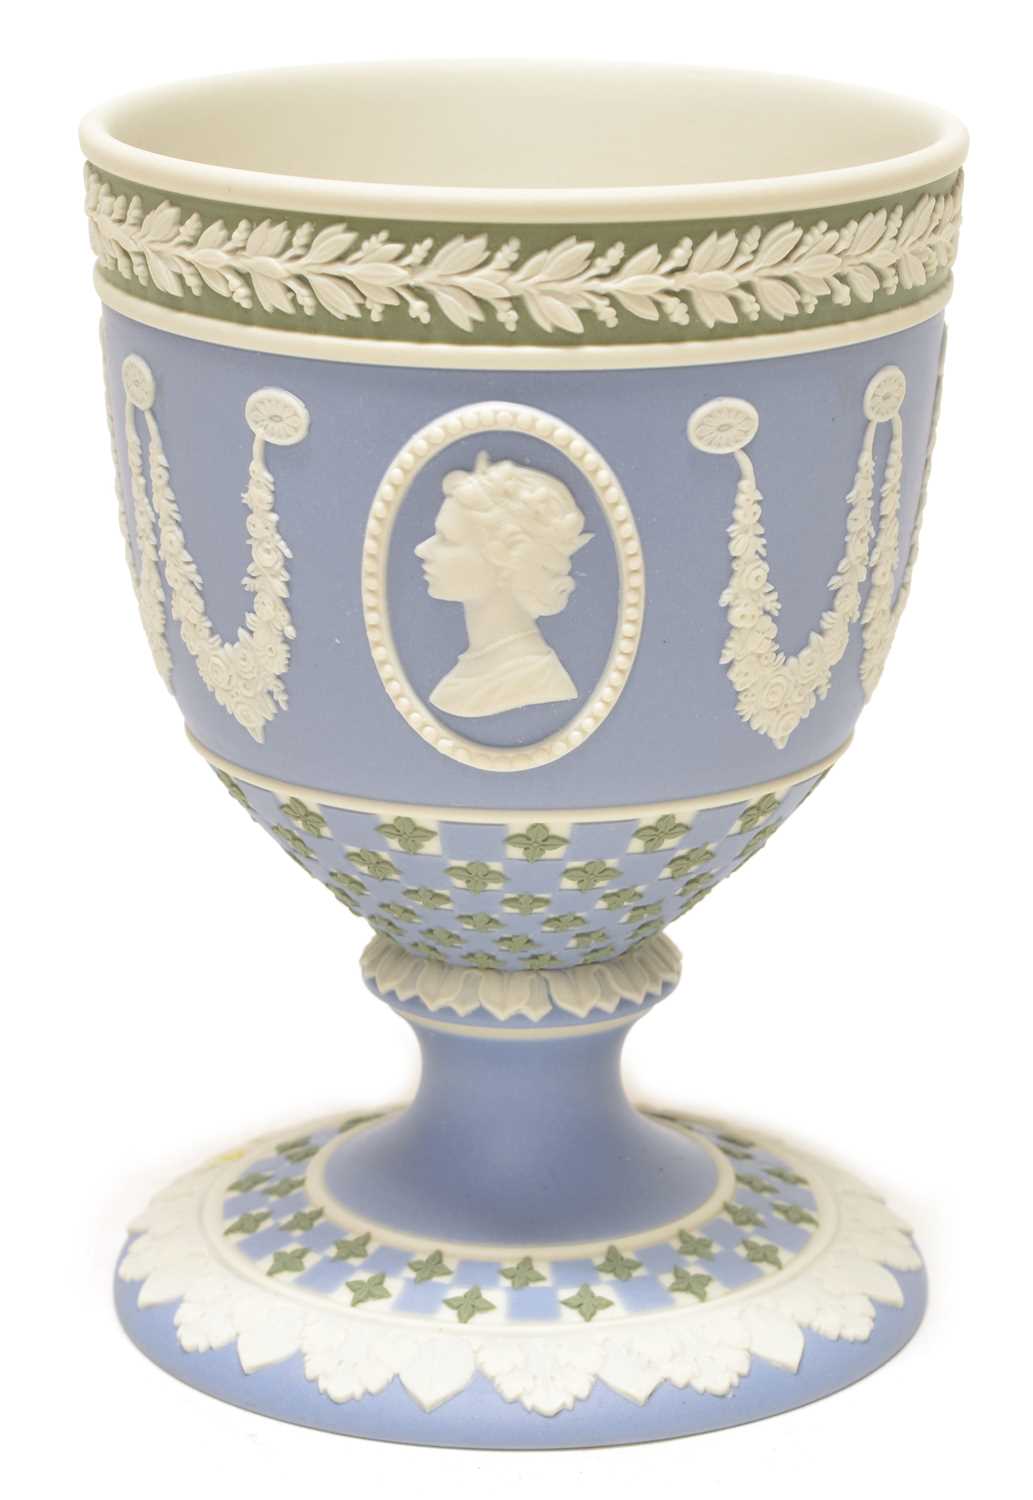 Lot 162 - Wedgwood Dice Ware Goblet